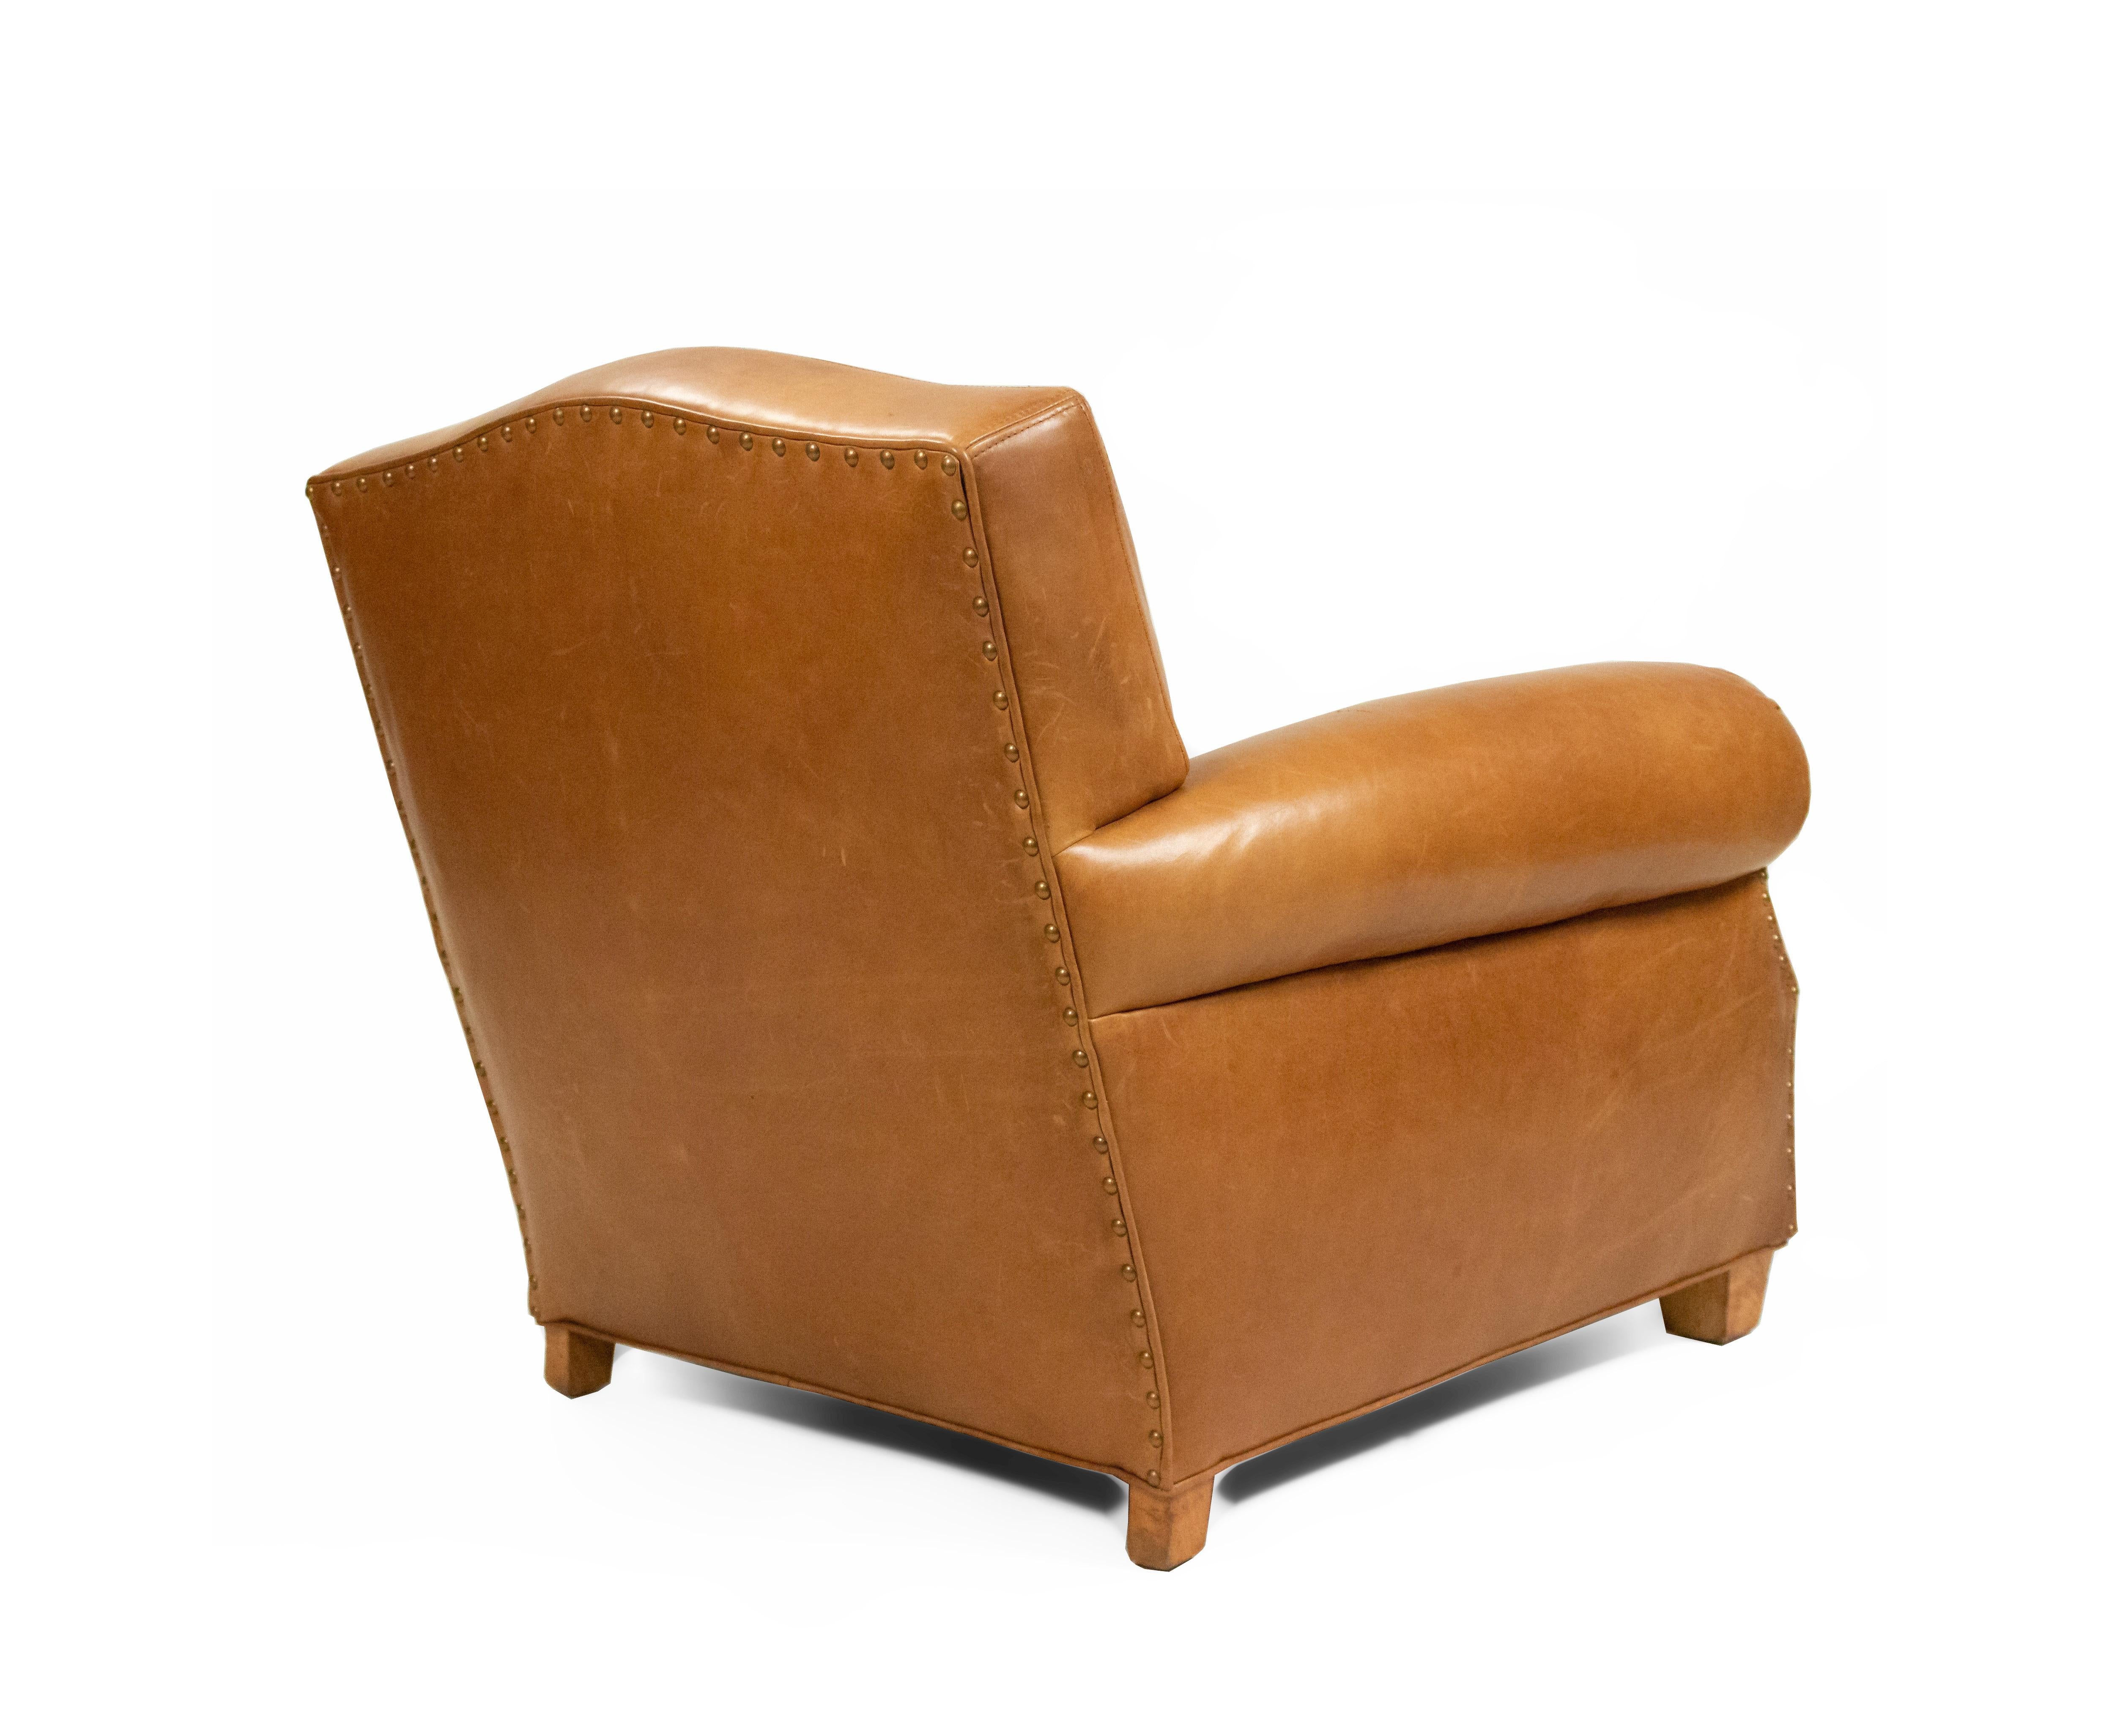 20th Century French Art Deco Style Tan Leather Club Chairs